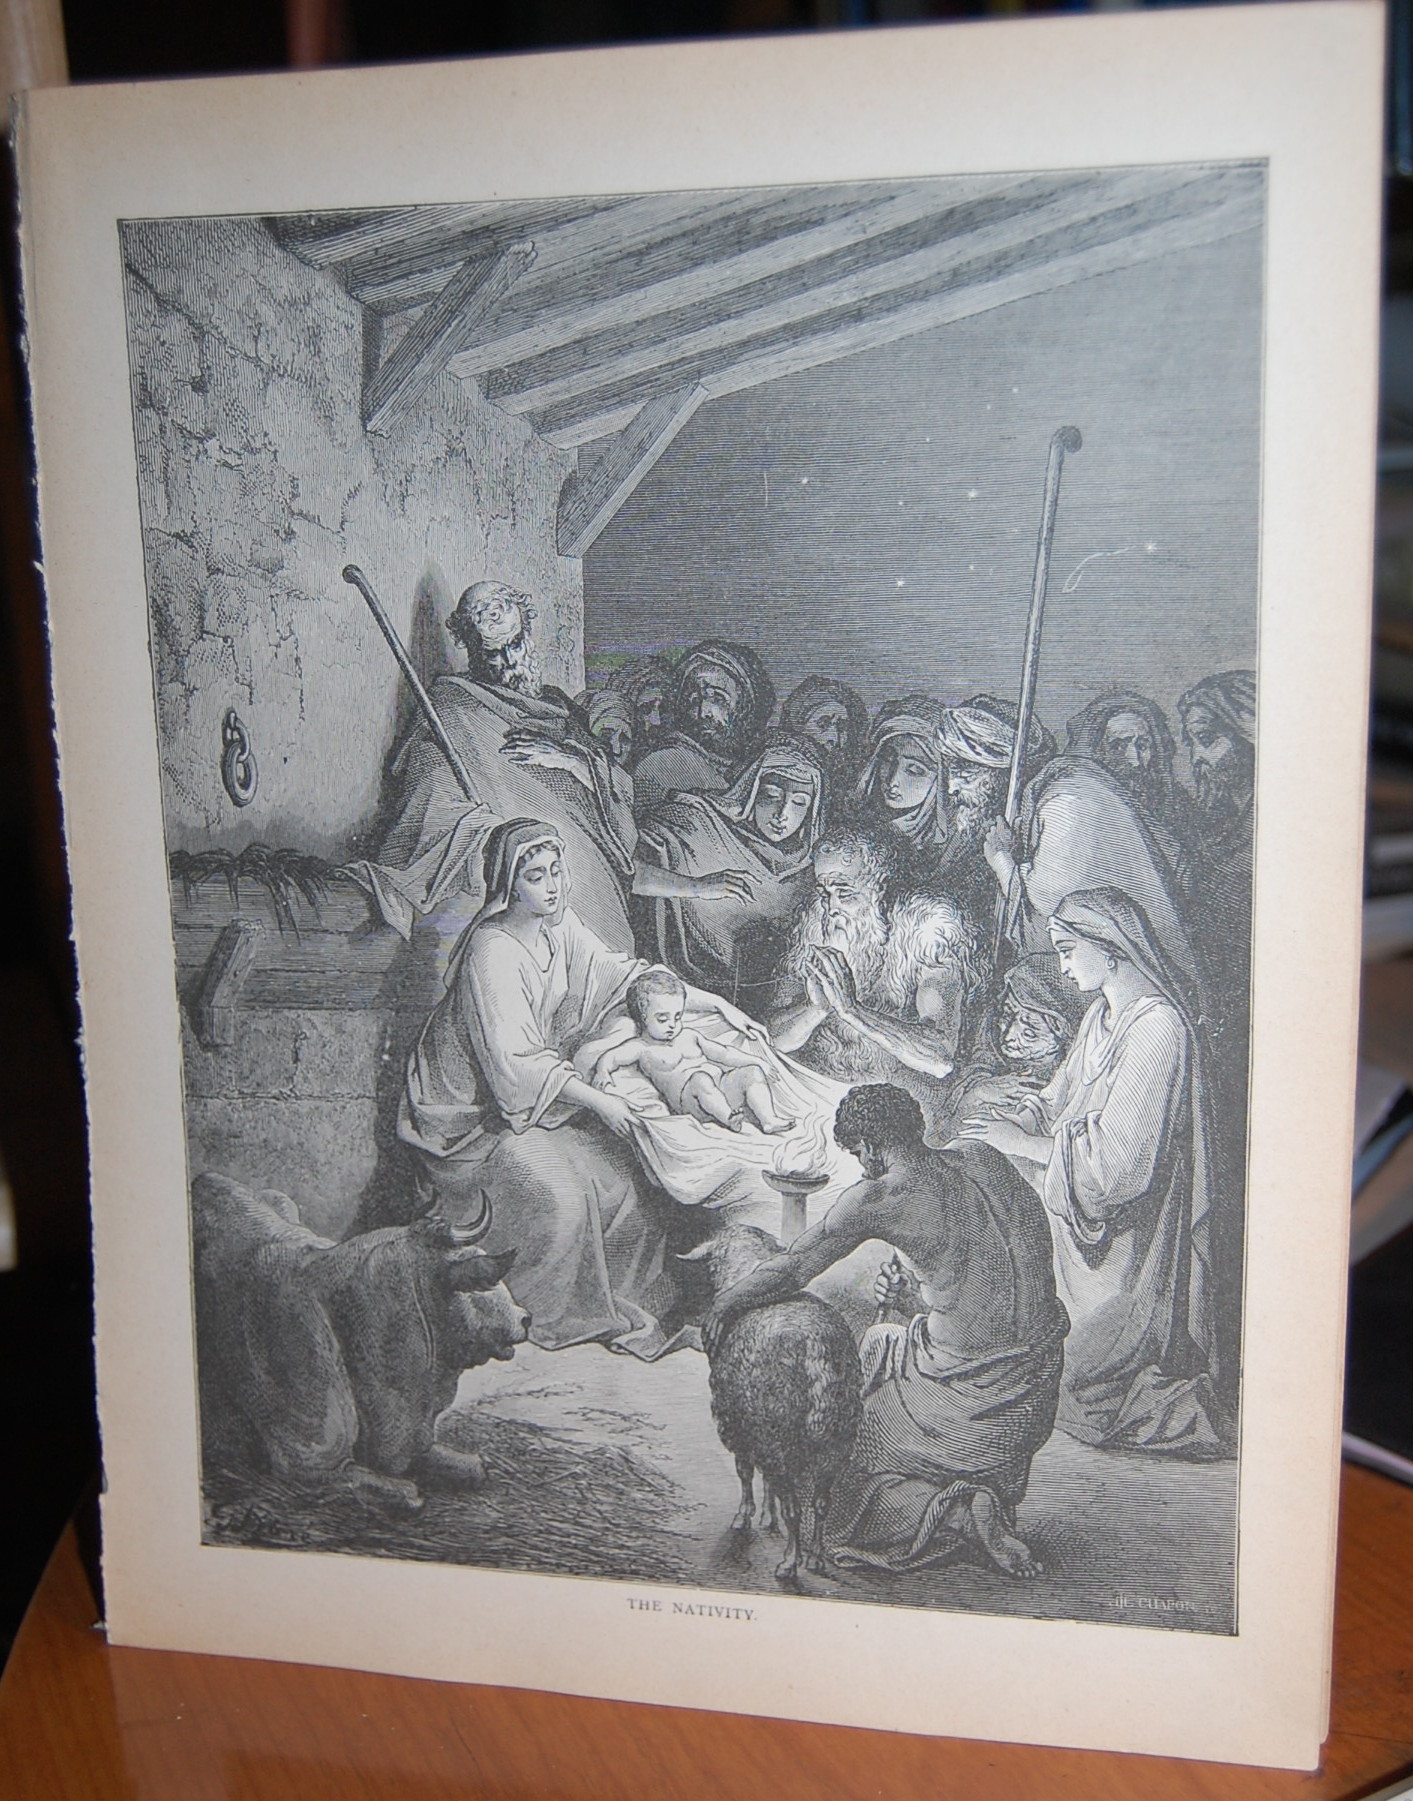 The Nativity. Original single leaf print engraving from The Bible ...